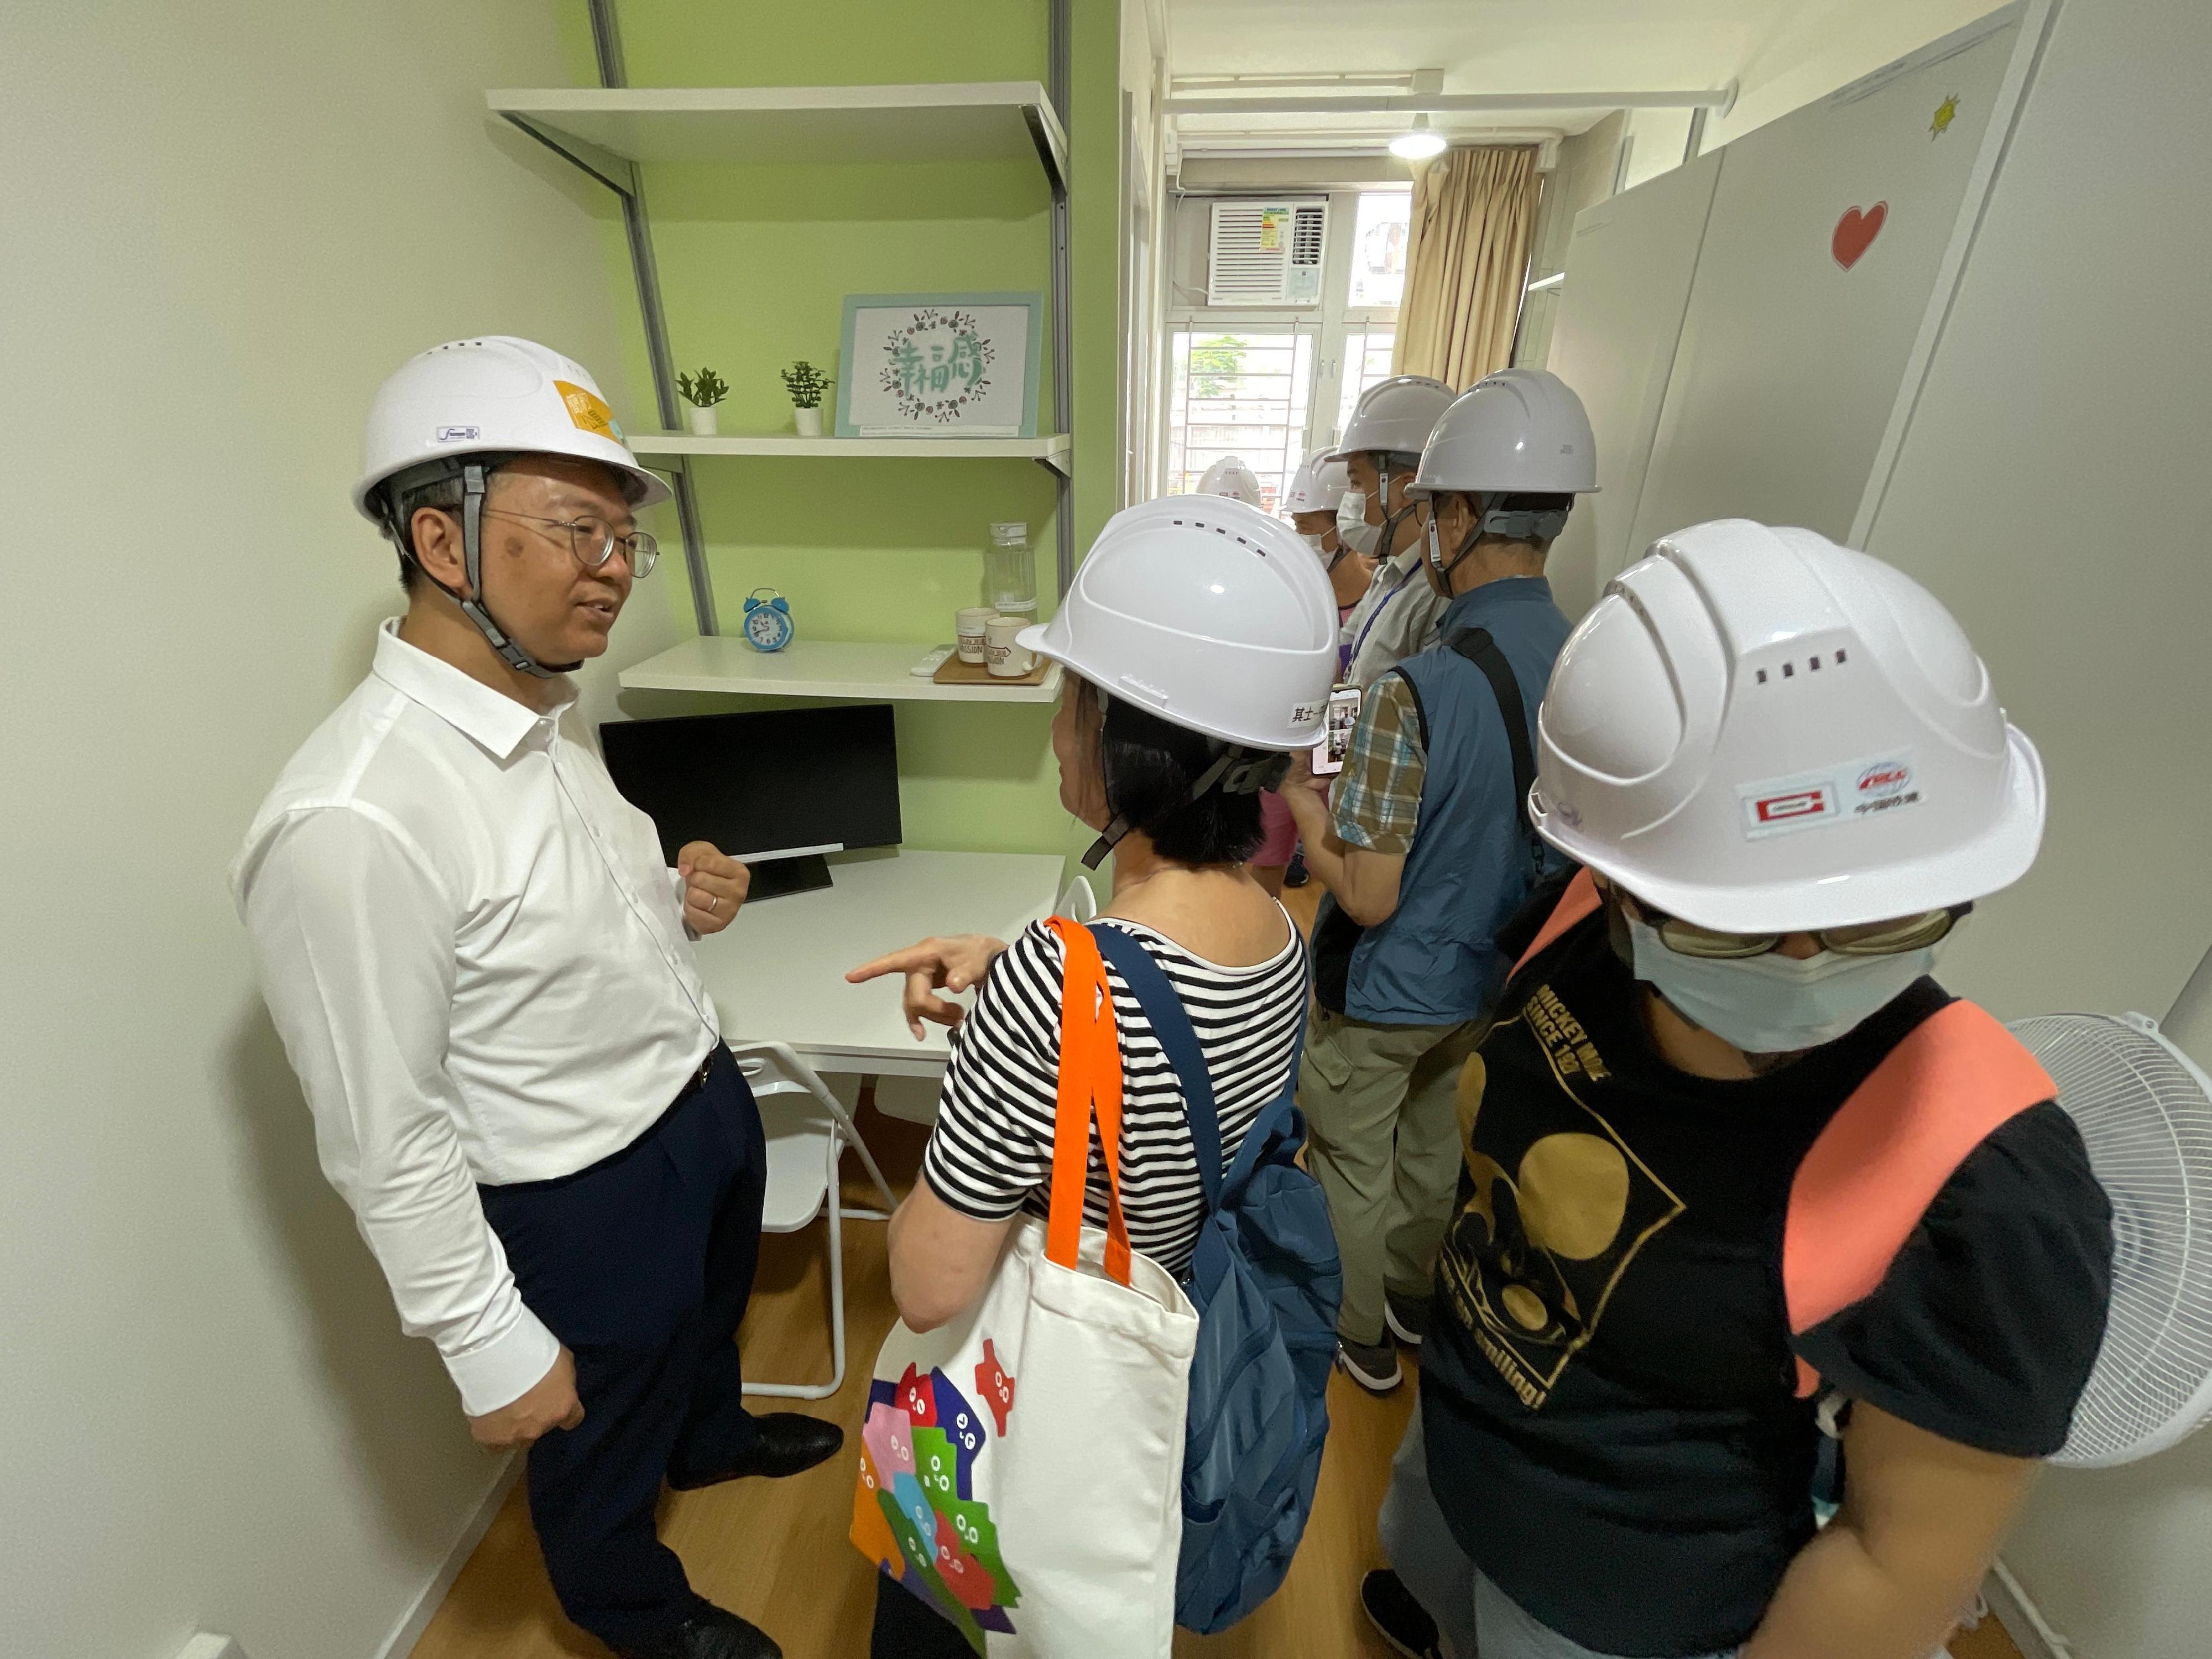 The Acting Secretary for Housing, Mr Victor Tai (first left), along with District Service Teams, visited Light Public Housing (LPH) mock-up units at Choi Hing Road, Ngau Tau Kok, today (June 28) together with a group of citizens interested in knowing more about, and applying for, LPH.